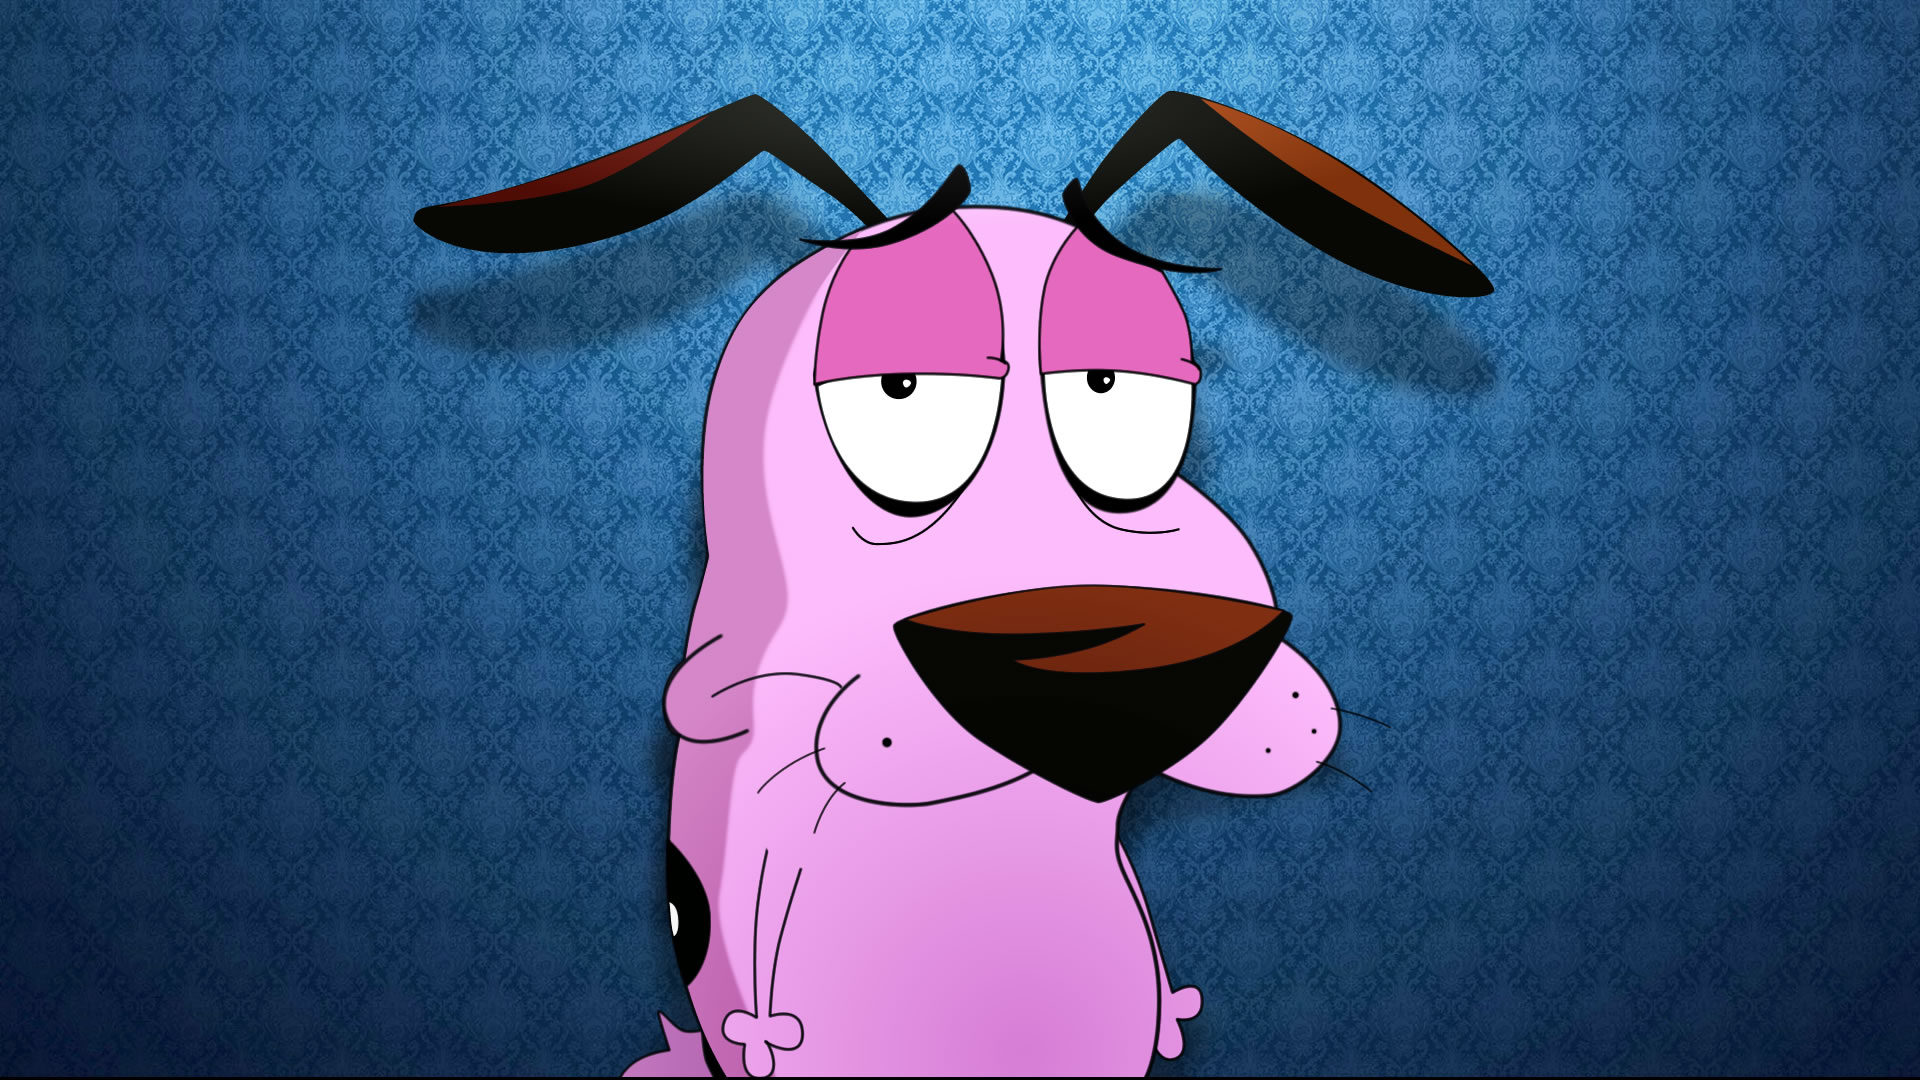 General 1920x1080 cartoon Courage the Cowardly Dog dog blue background pink